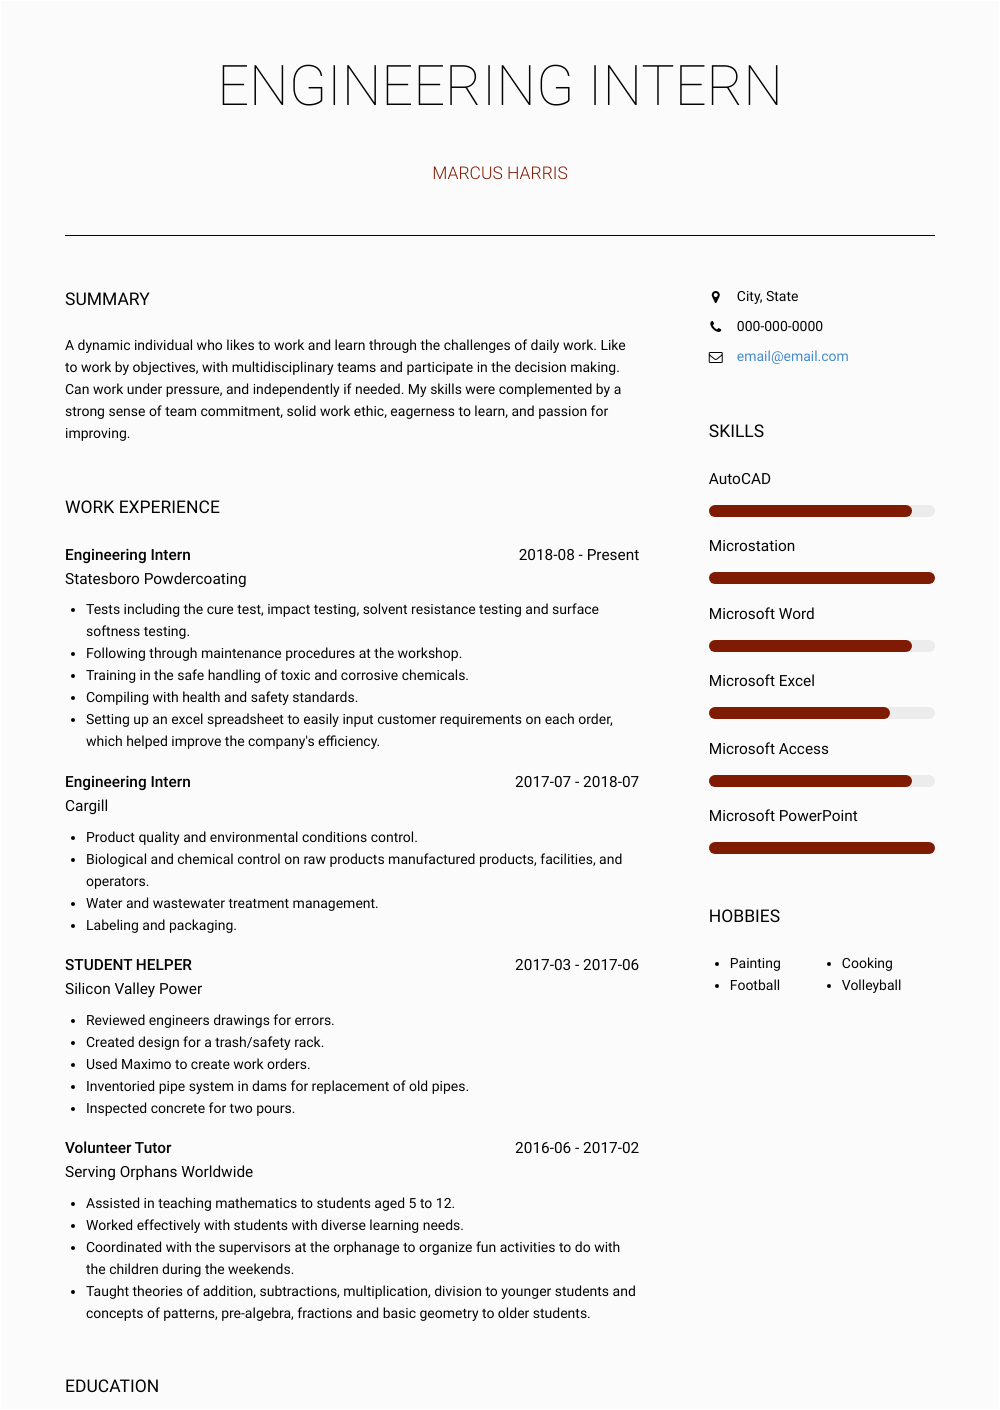 Sample Engineering Student Resume for Internship Engineering Intern Resume Samples and Templates